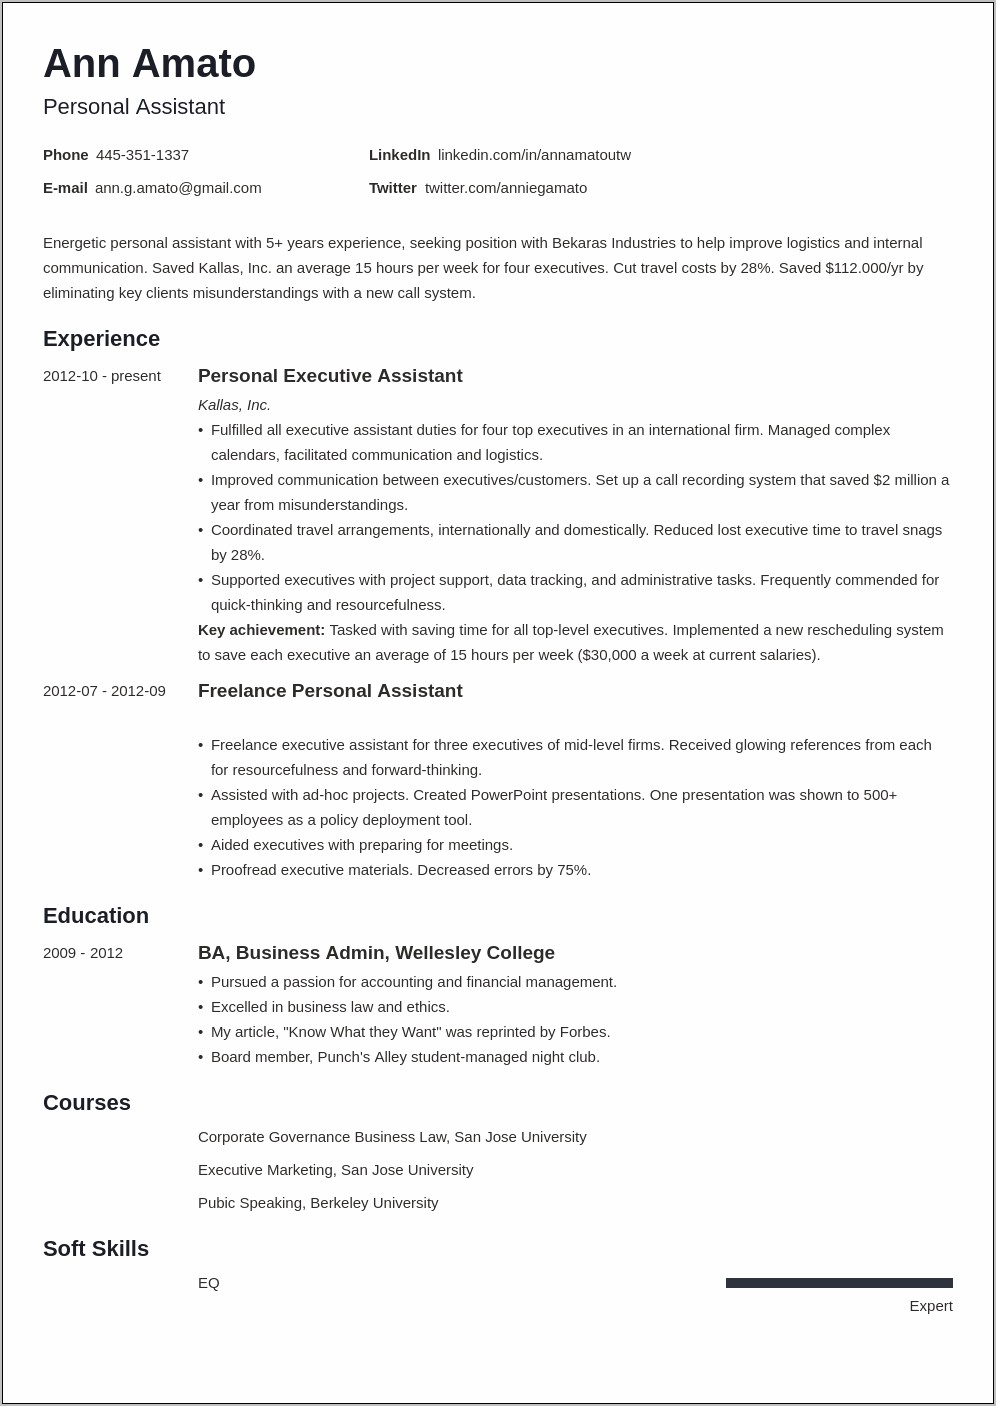 Examples Of Resumes Job Experience